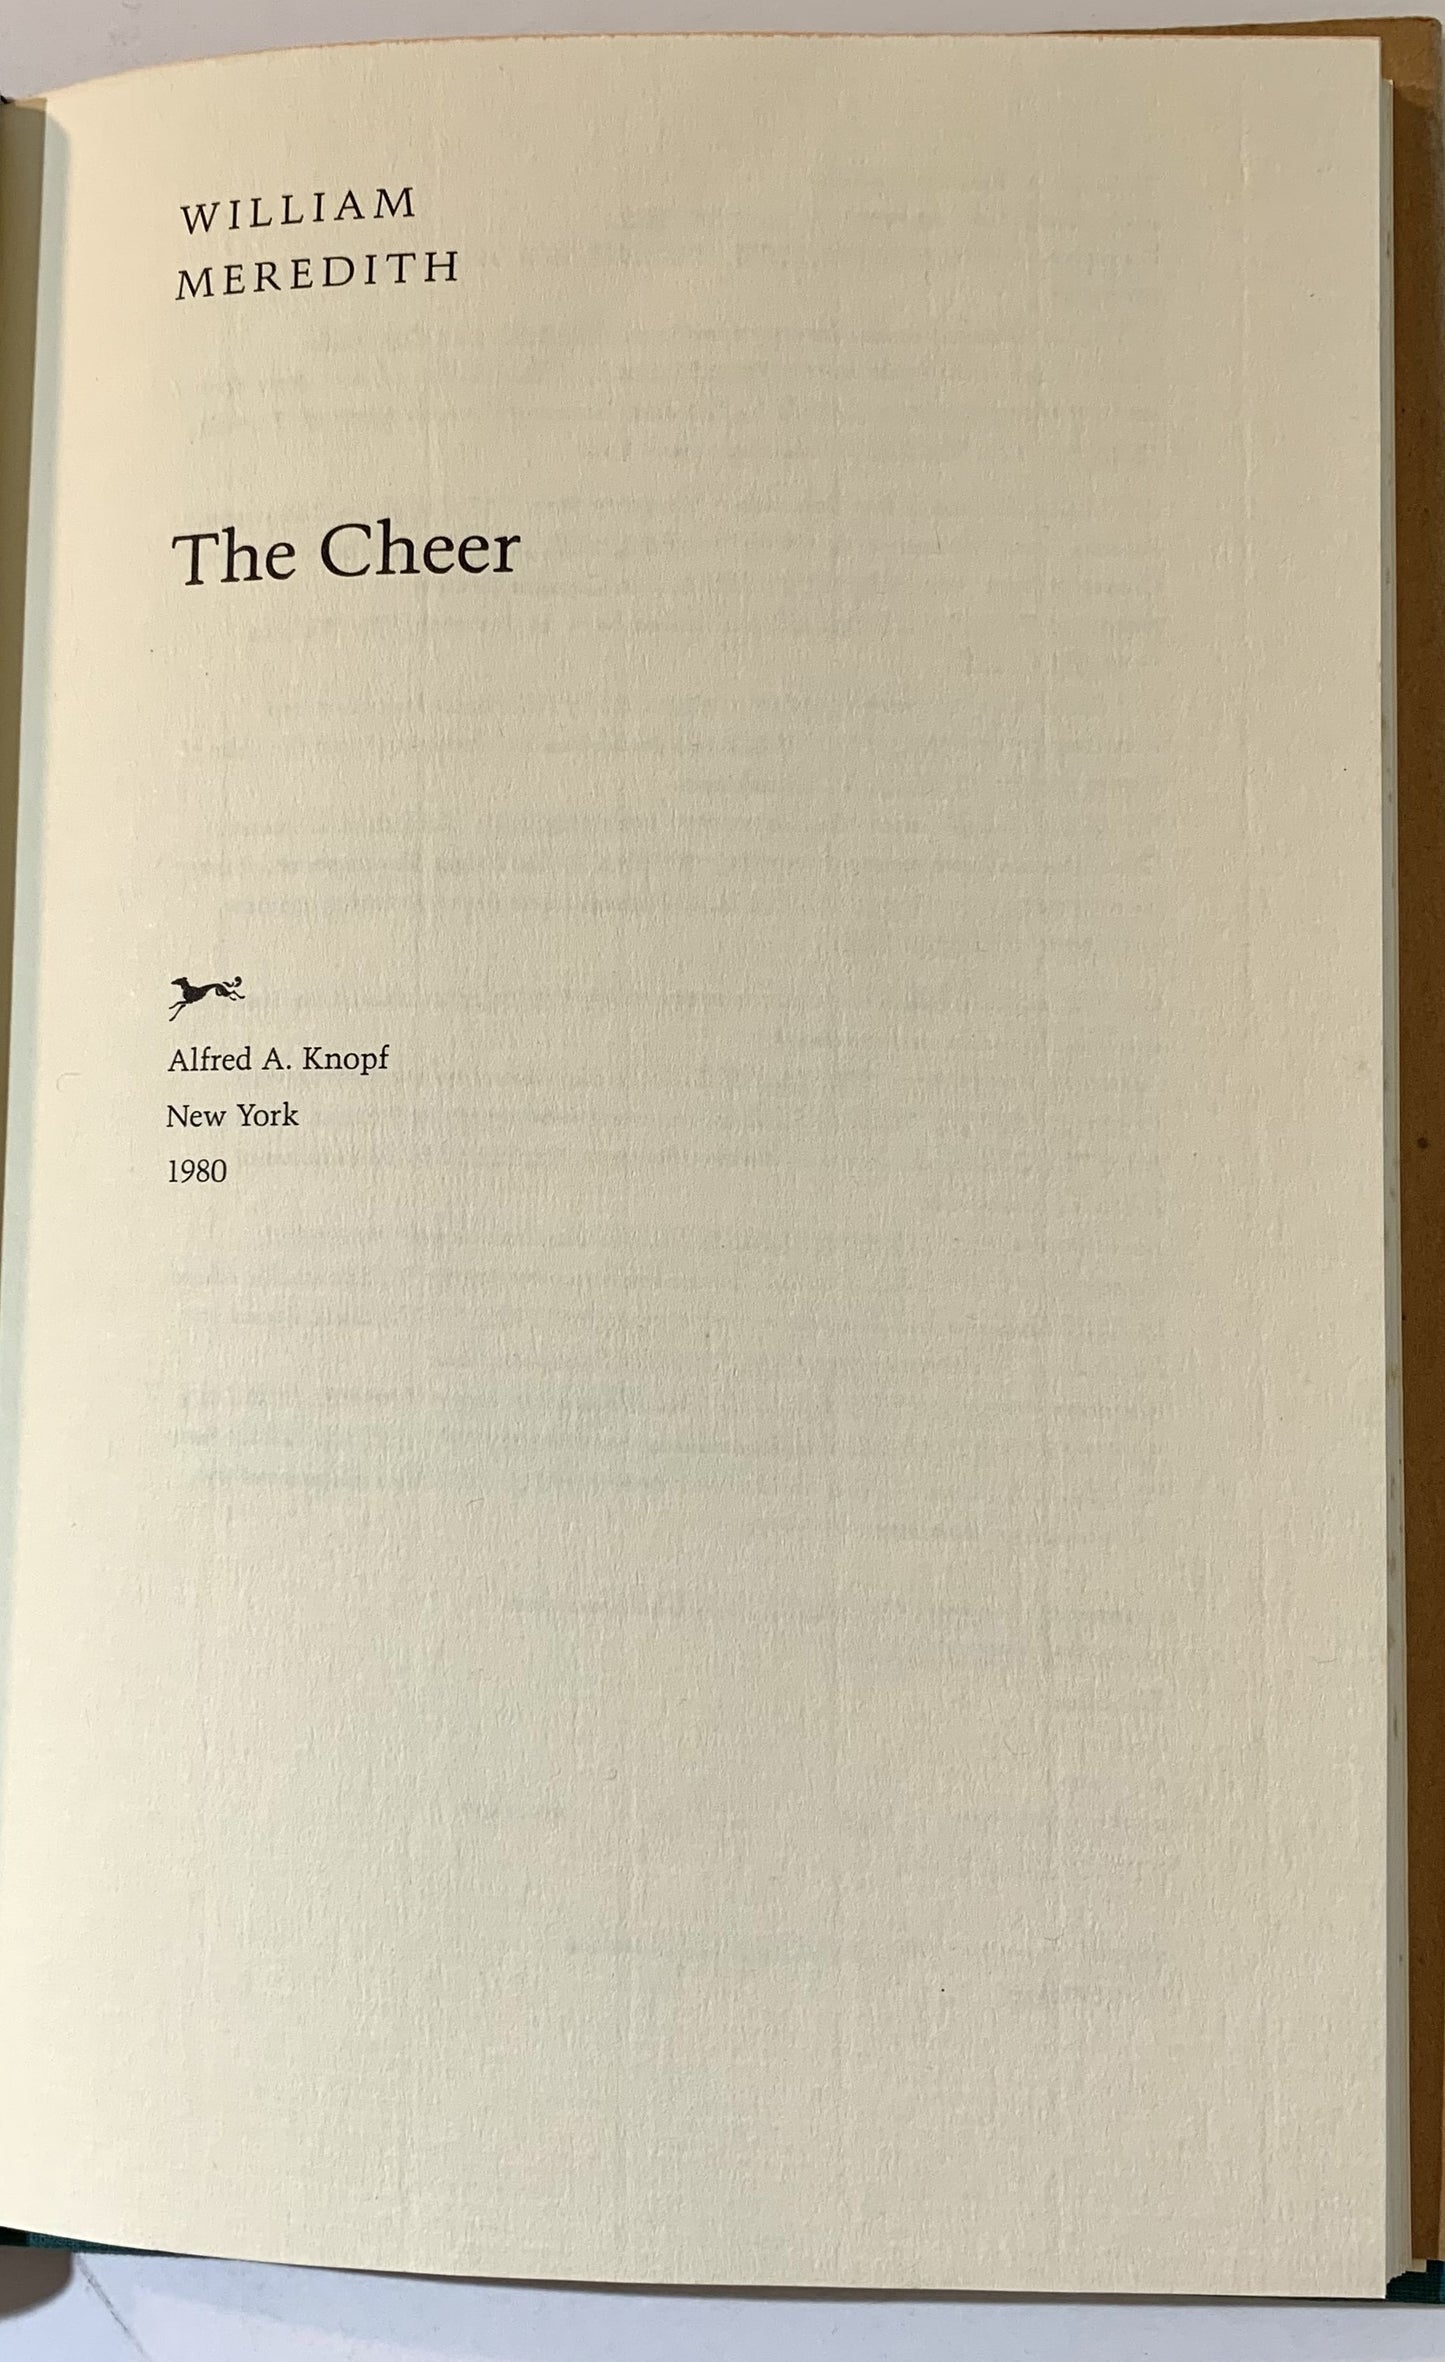 The Cheer